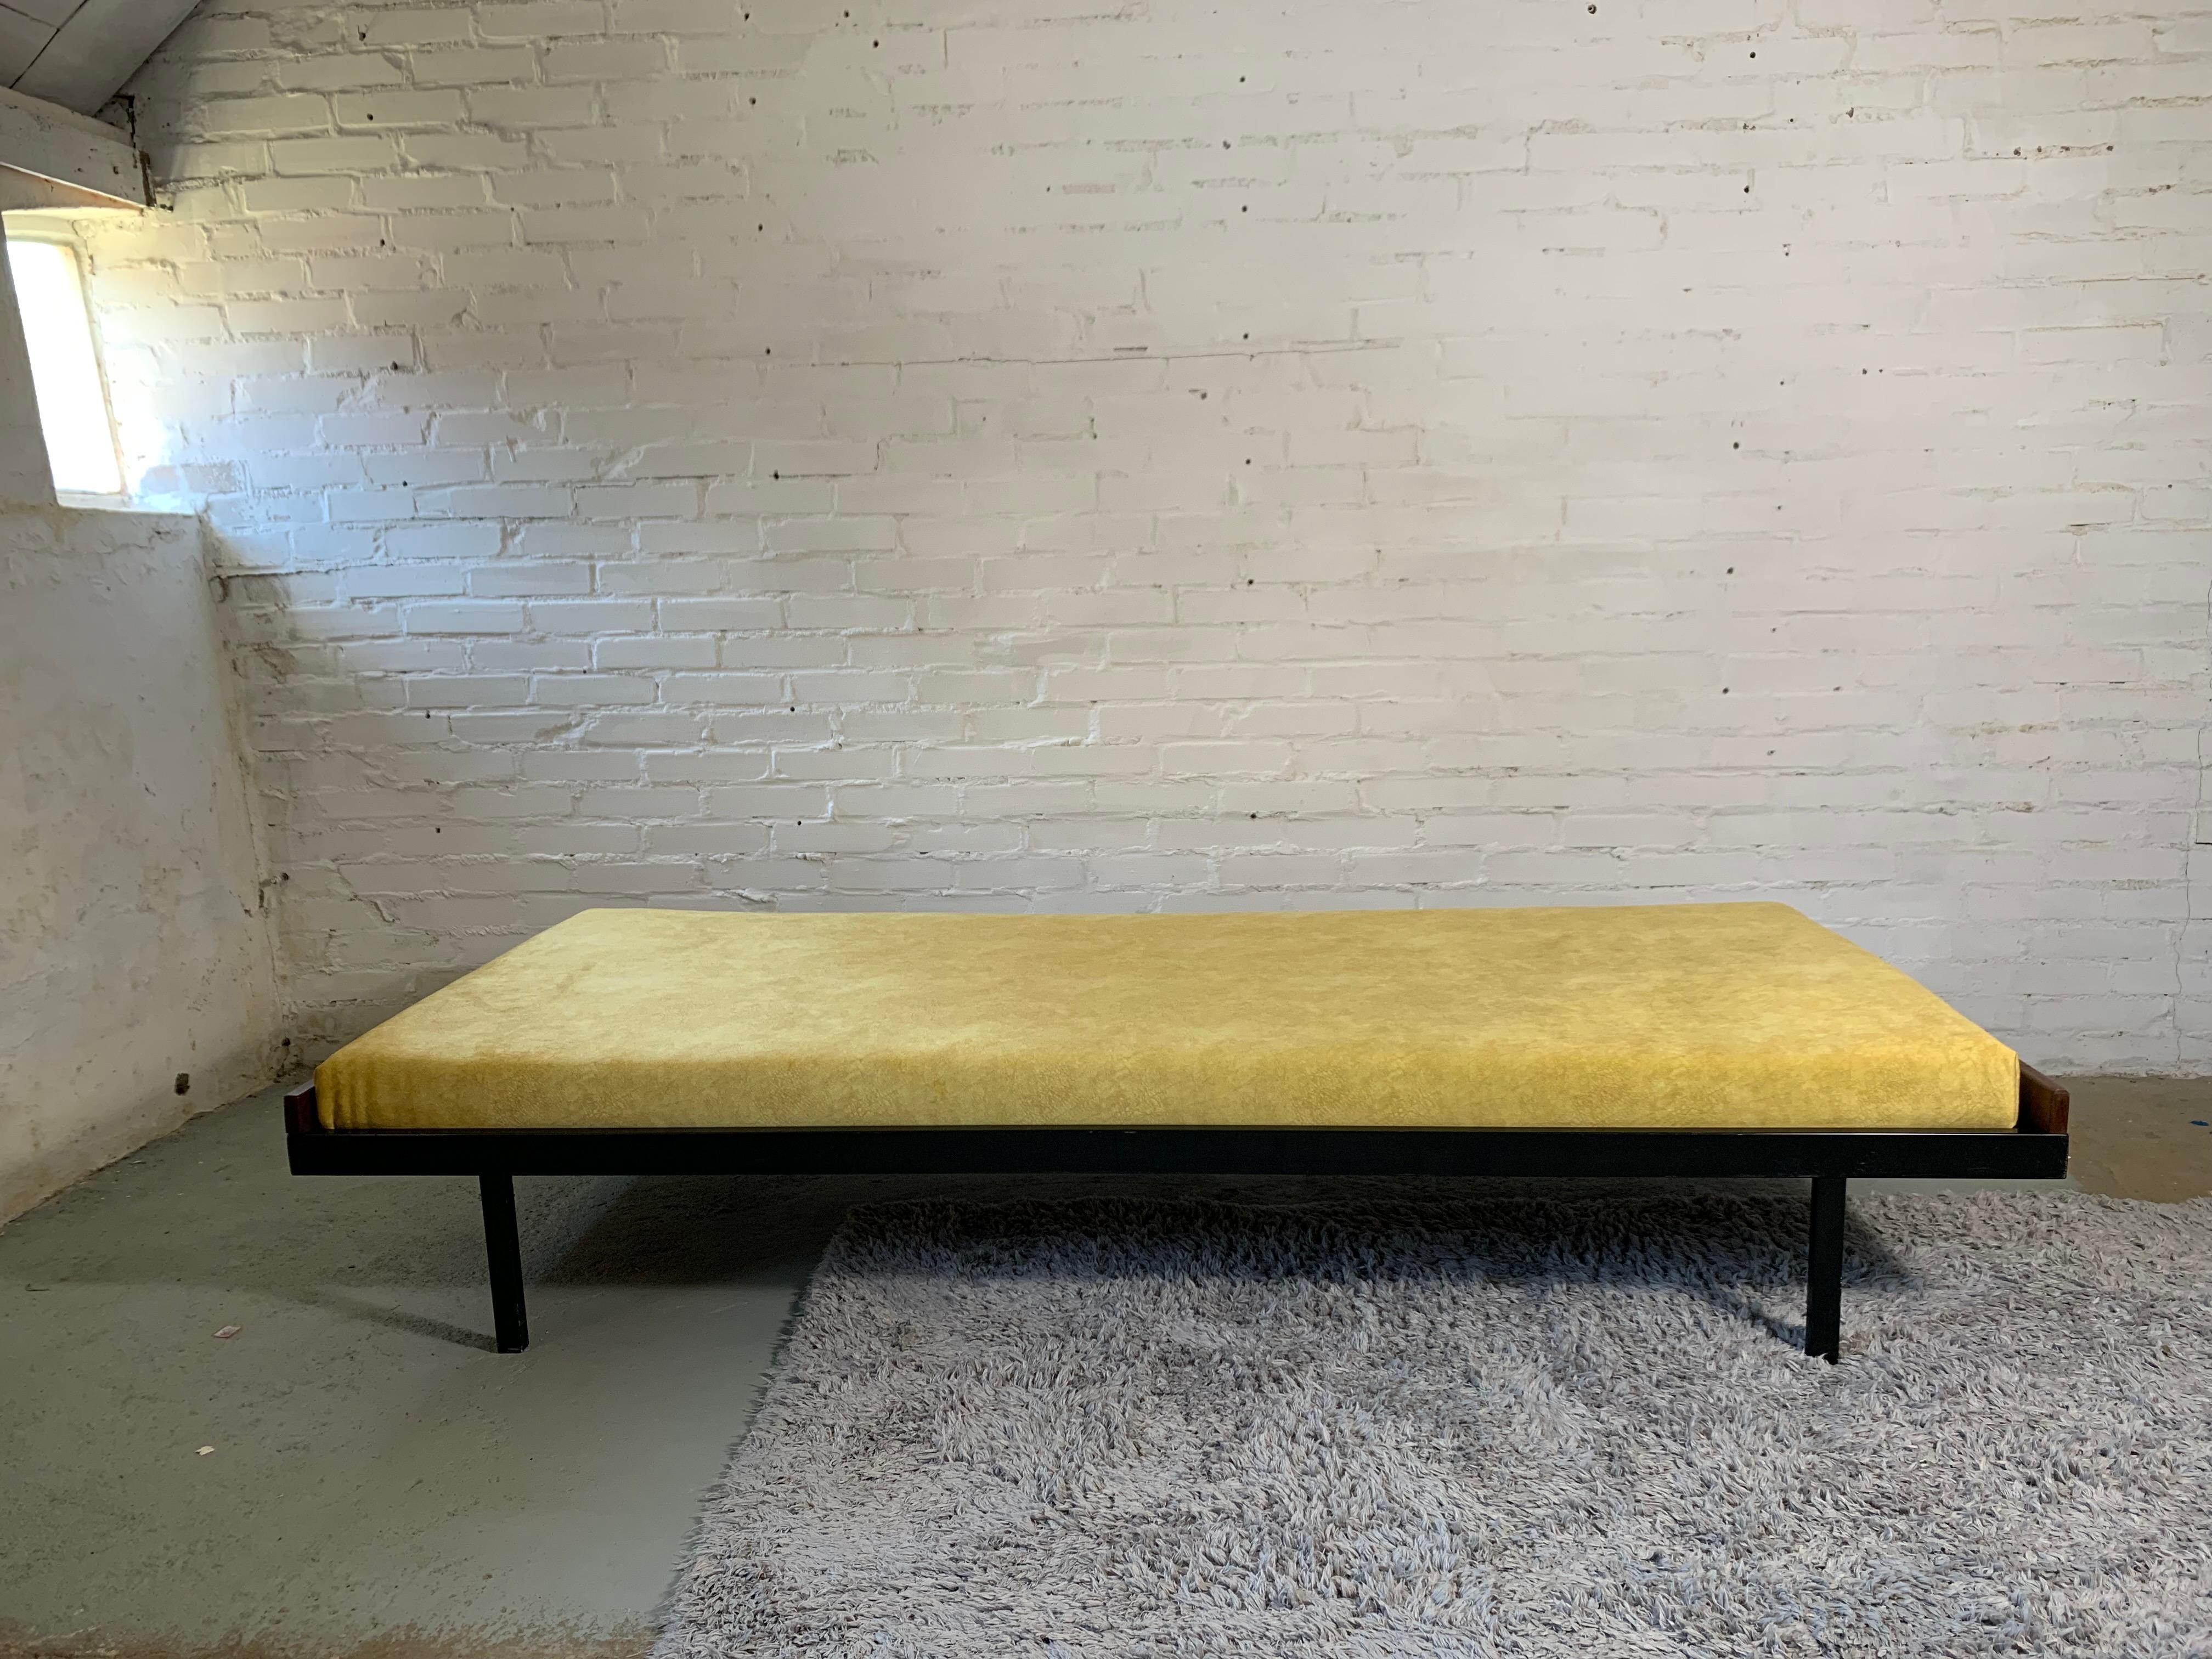 Rare day bed designed by Friso Kramer for Auping. Very simple minimalistic metal frame with teak details. Meteras is made specialy for this bed and upholstered with contrasting with the simple frame luxurious fabric.